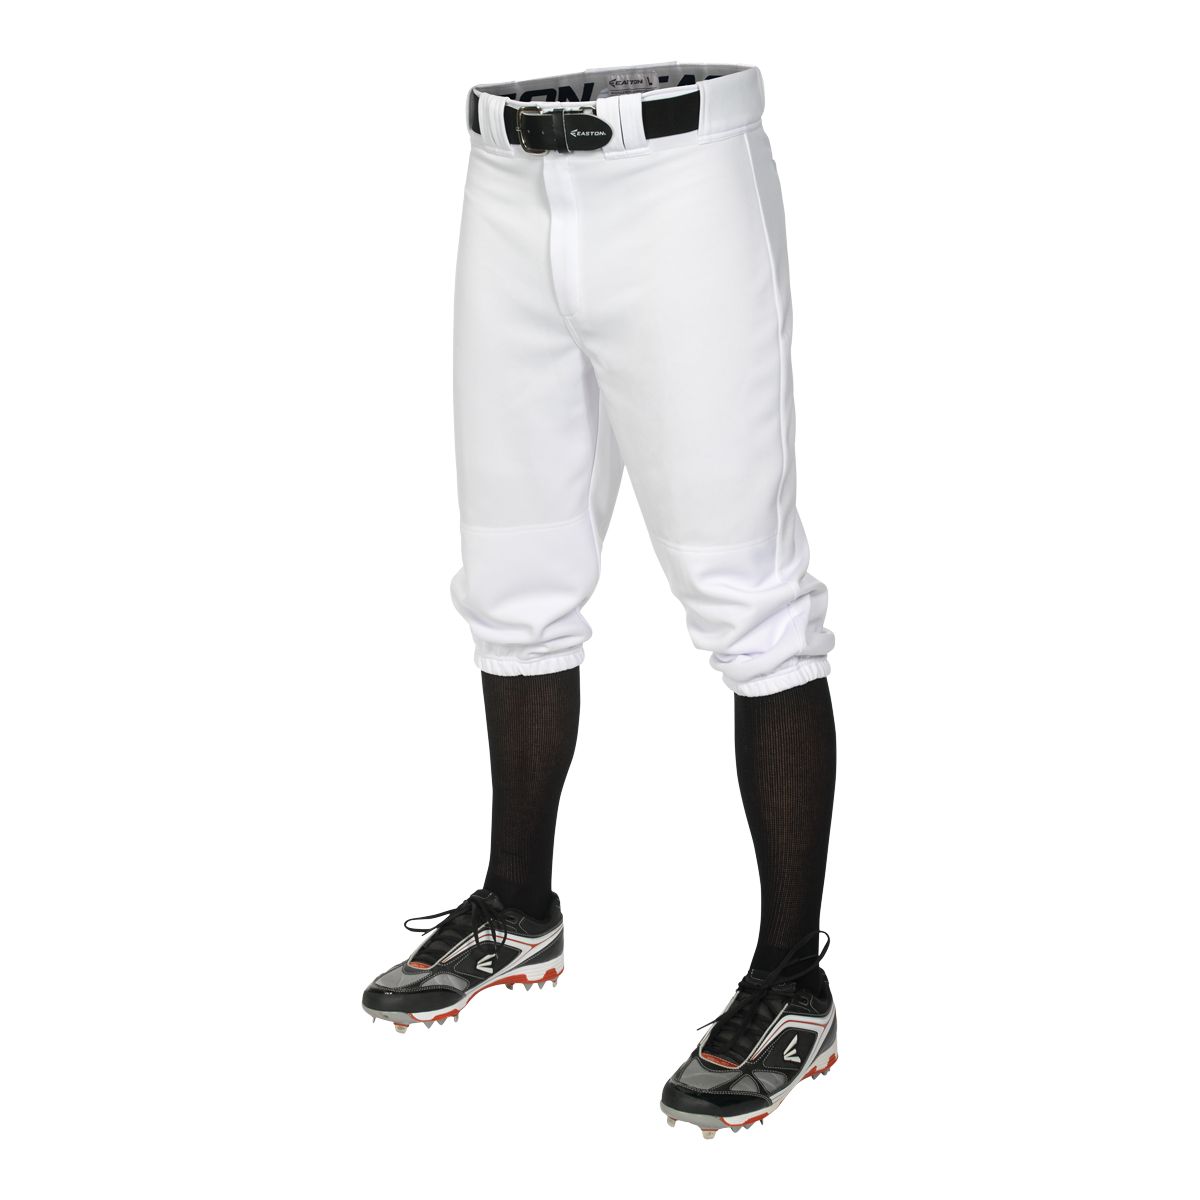 Rawlings Youth Relaxed Fit YBP31MR Baseball Pant, Blue Grey, Youth Small :  Sports & Outdoors - Amazon.com